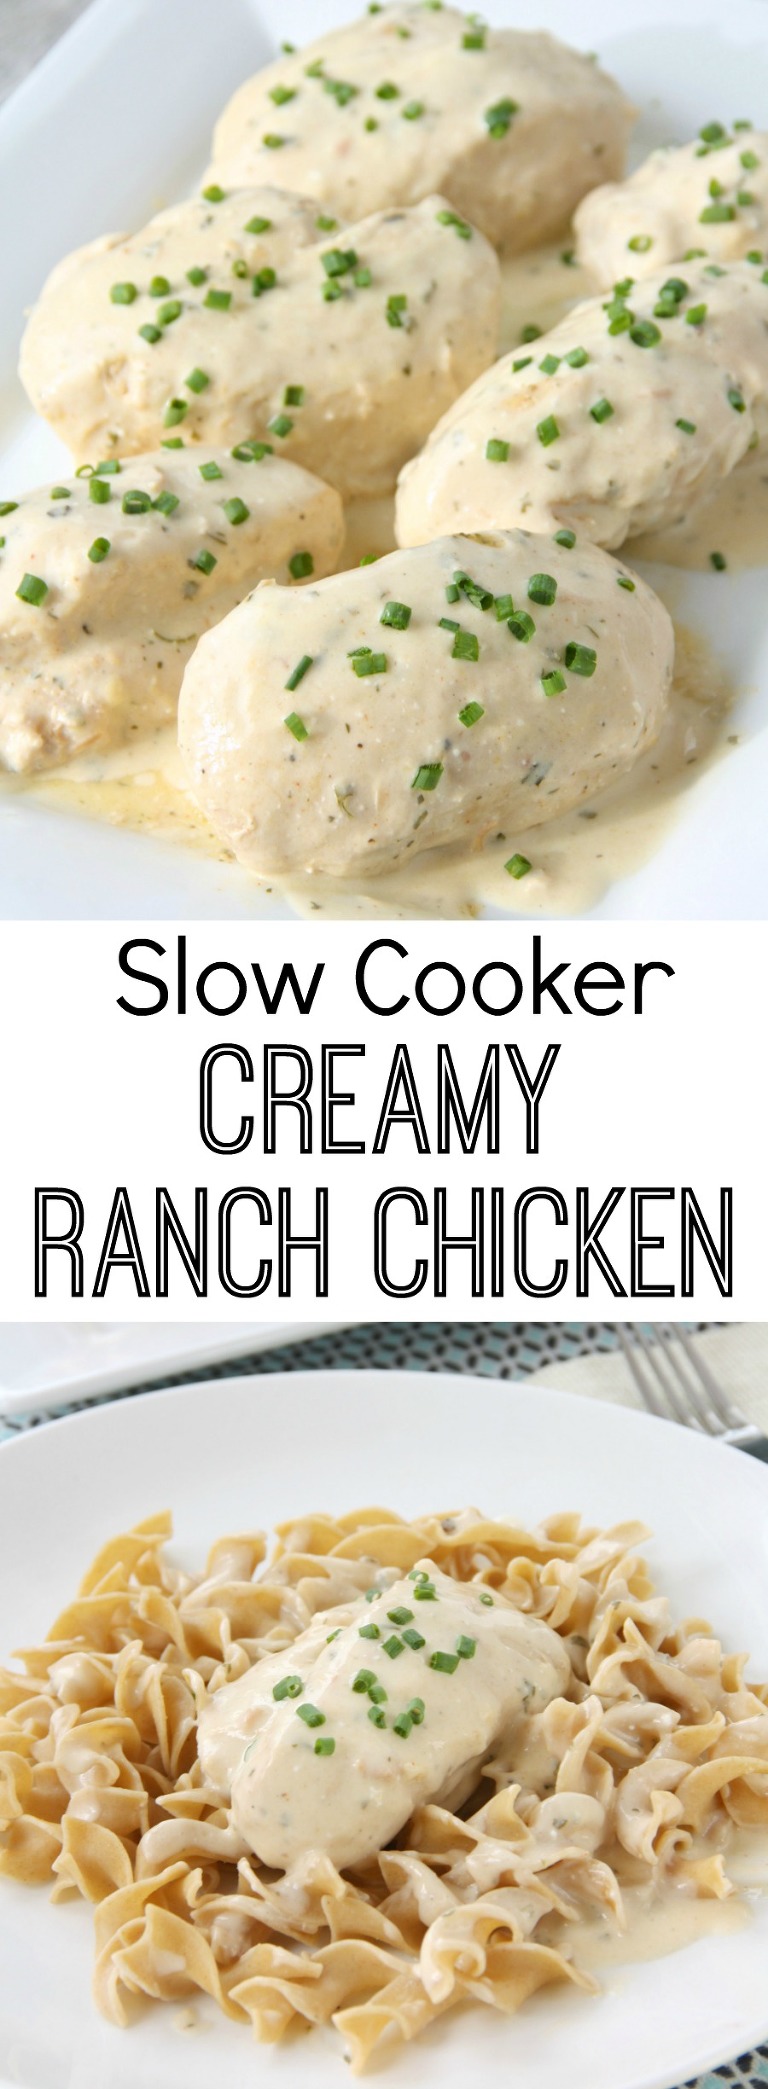 slow cooker chicken recipe that is creamy and delicious. Creamy ranch chicken will be your favorite family meal.